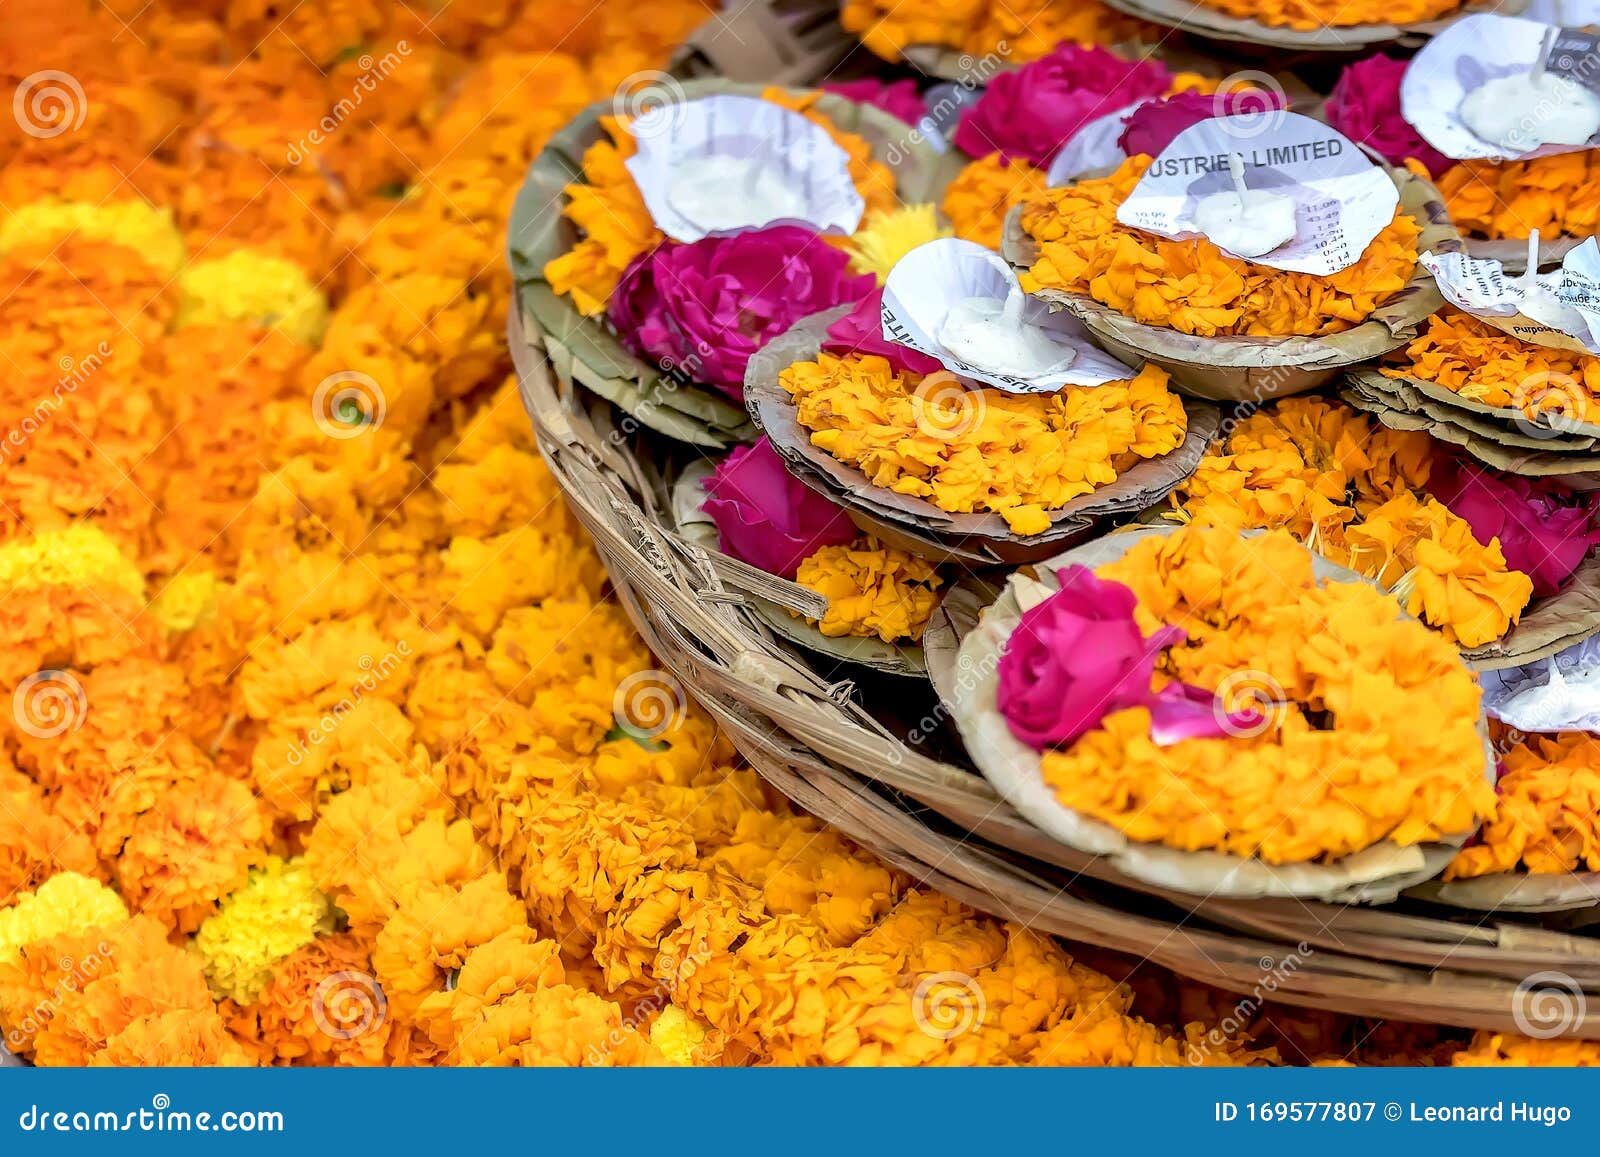 floating garlands of flowers and floating candles placed by pilgrims on the river ganges as offerings.